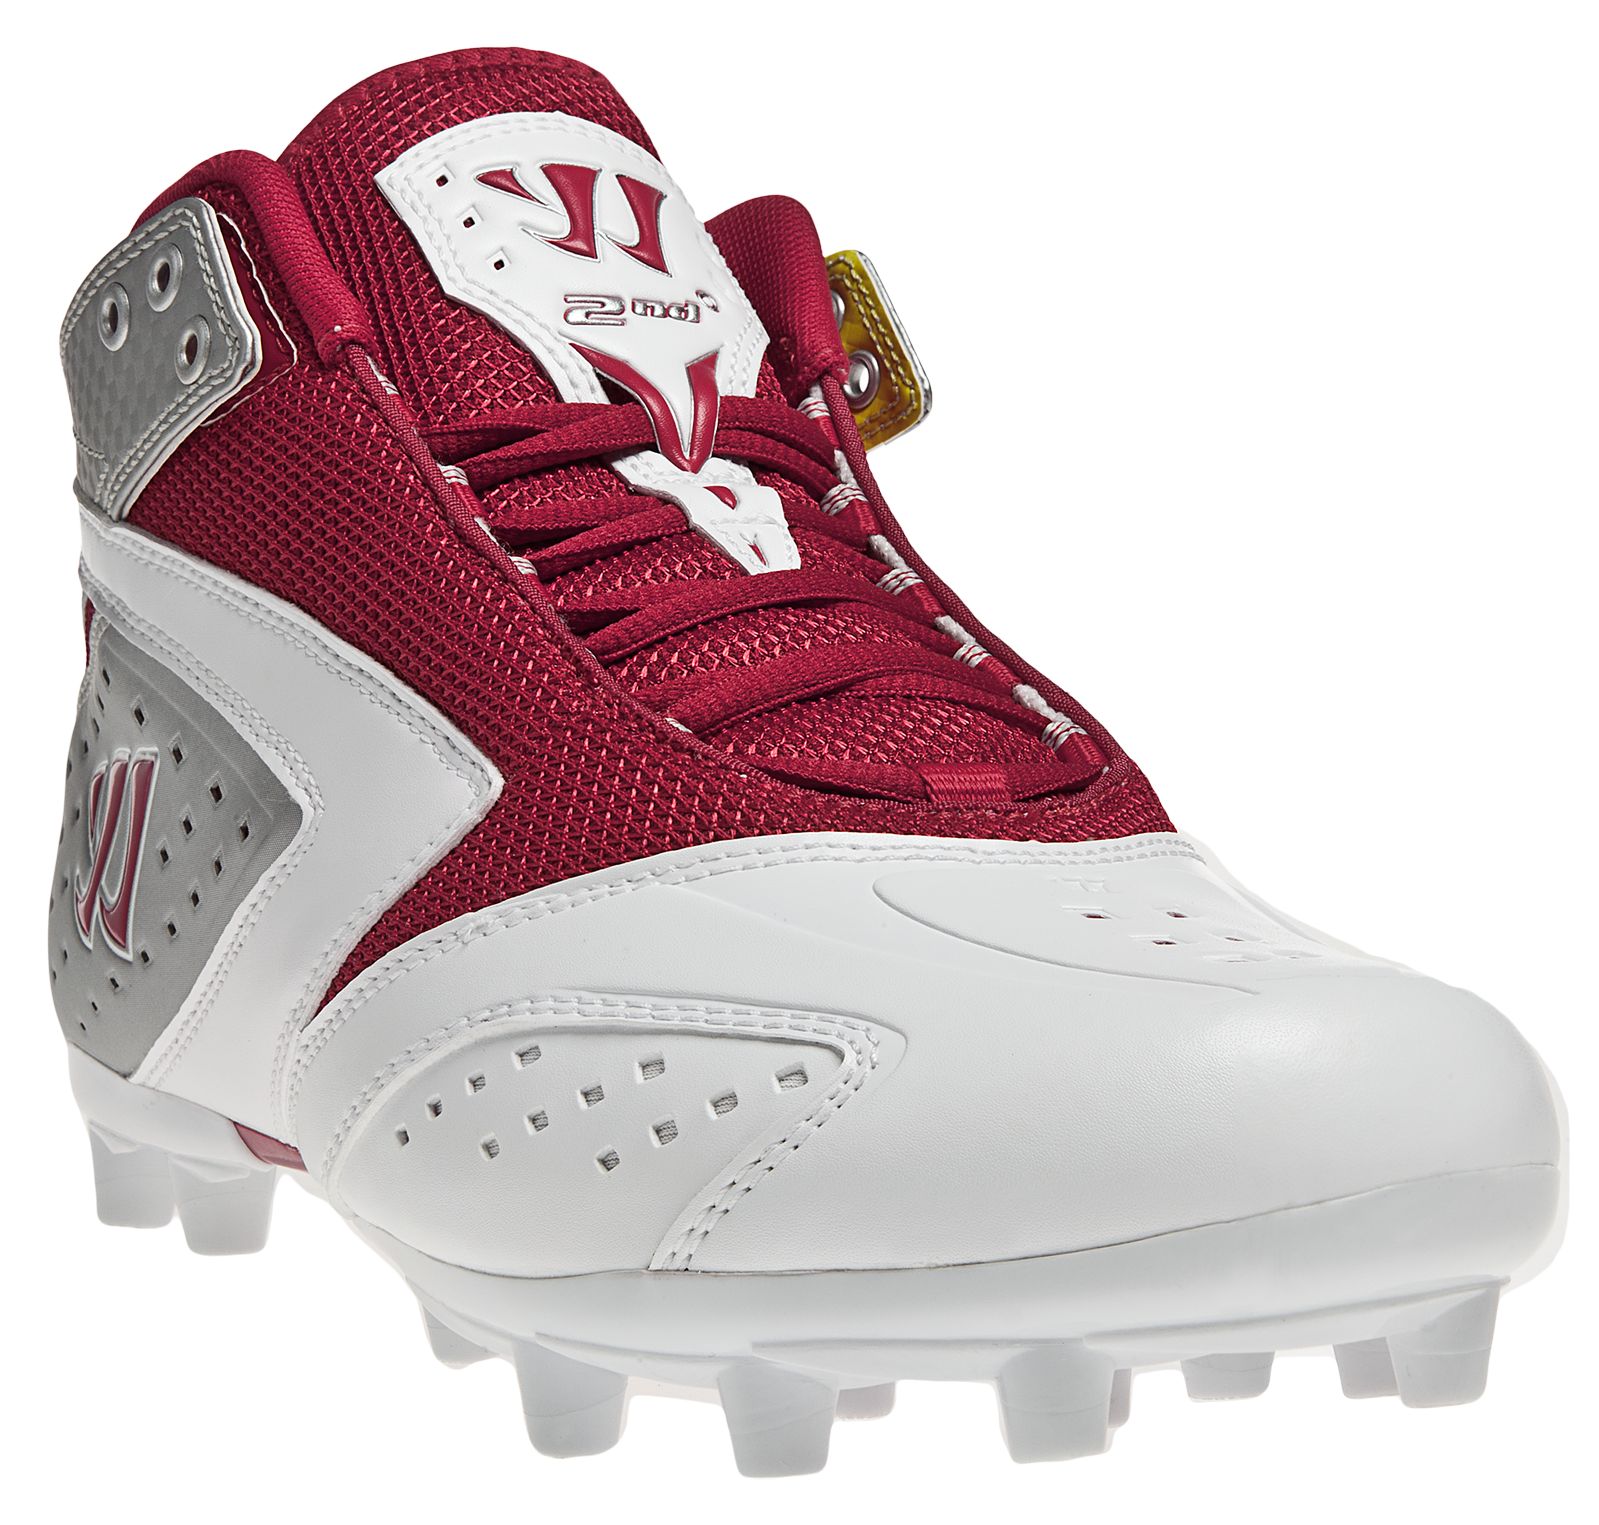 Burn 2nd Degree Cleat, Red with White & Silver image number 2